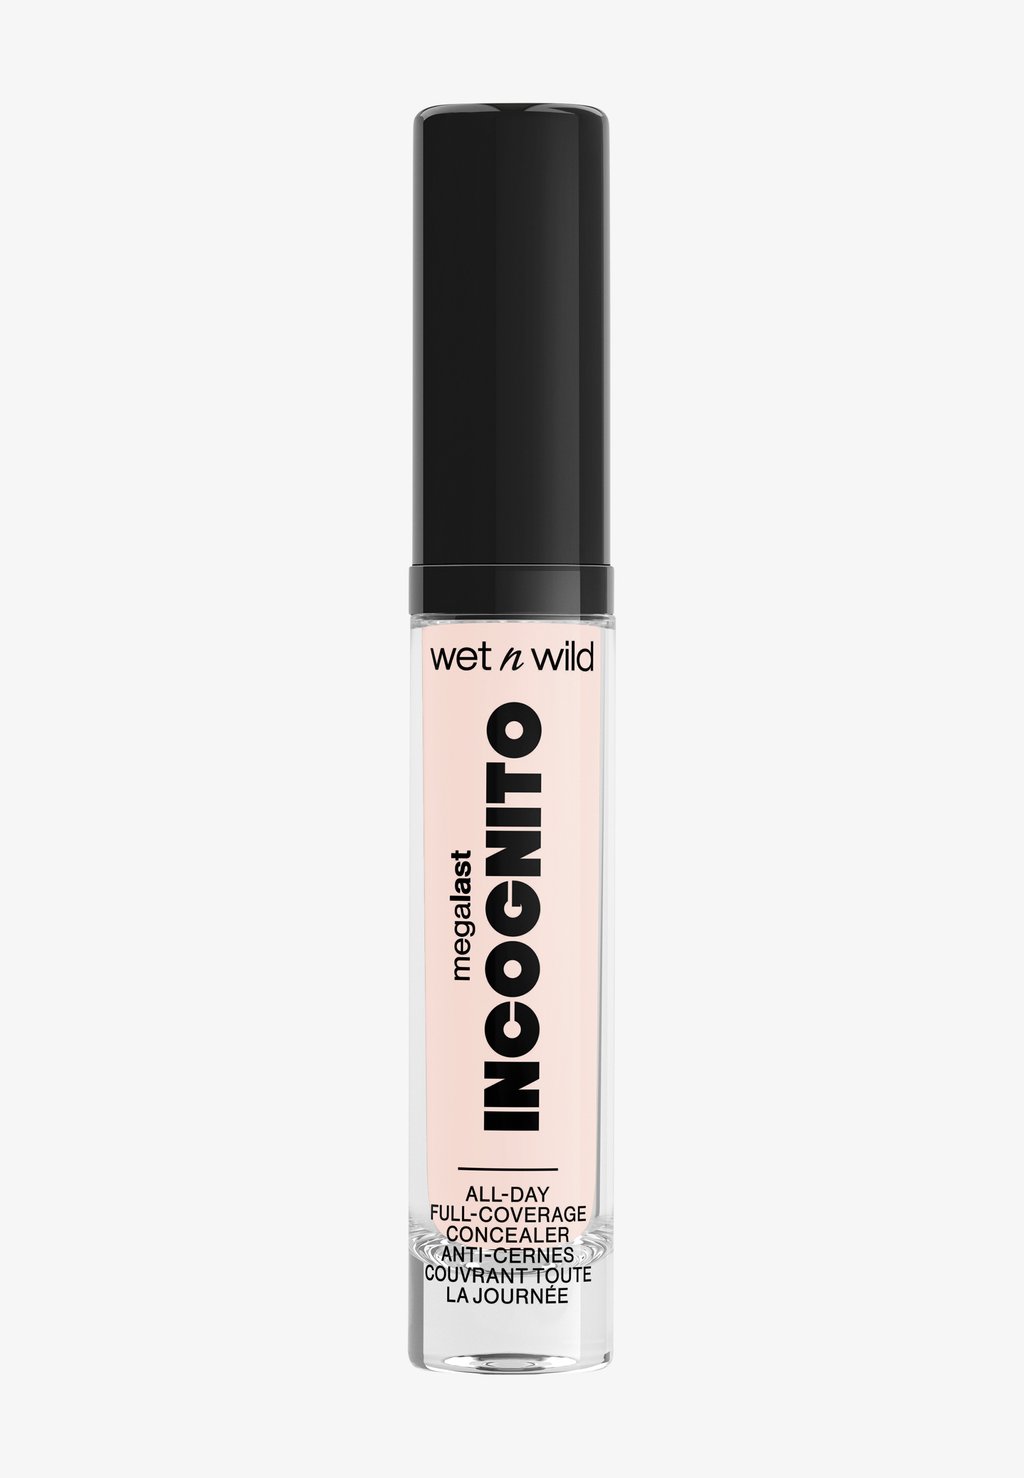 Консилер Megalast Incognito All-Day Full Coverage Concealer WET N WILD, цвет fair beige